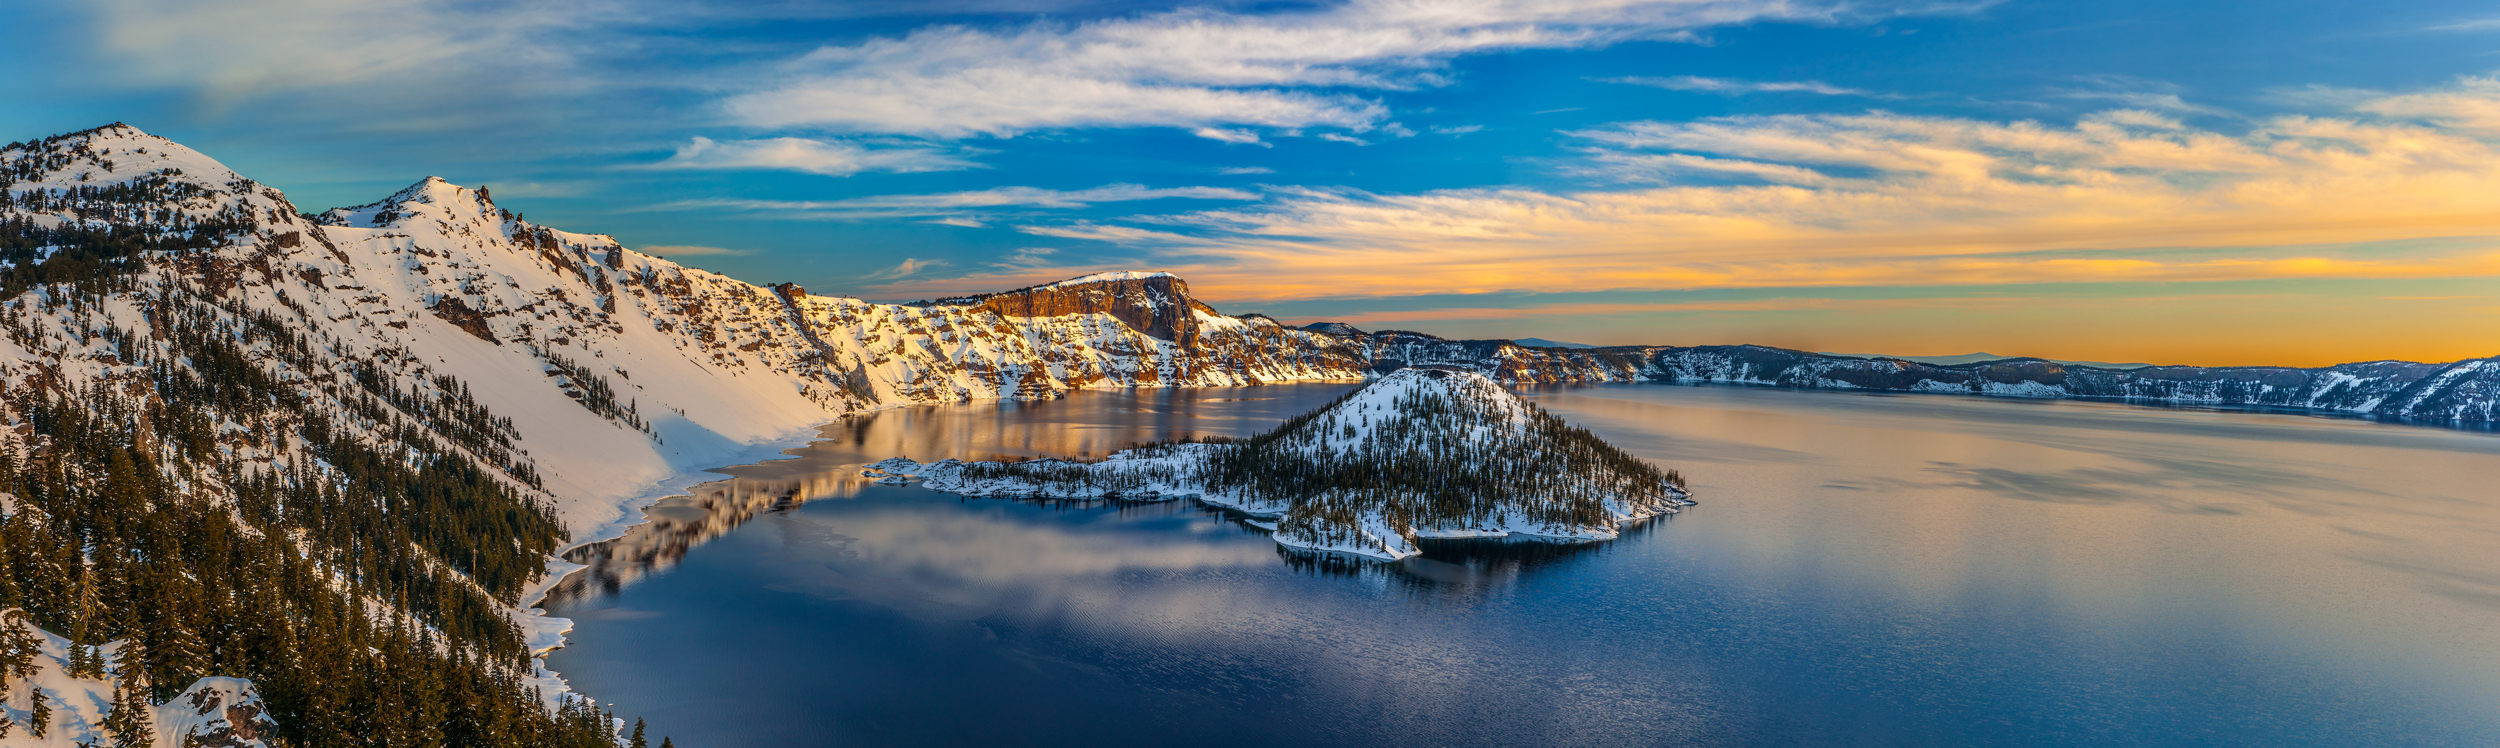 Crater Lake National Park Oregon Wizard Island Panorama Fine Art Landscape Photography Mark Lilly